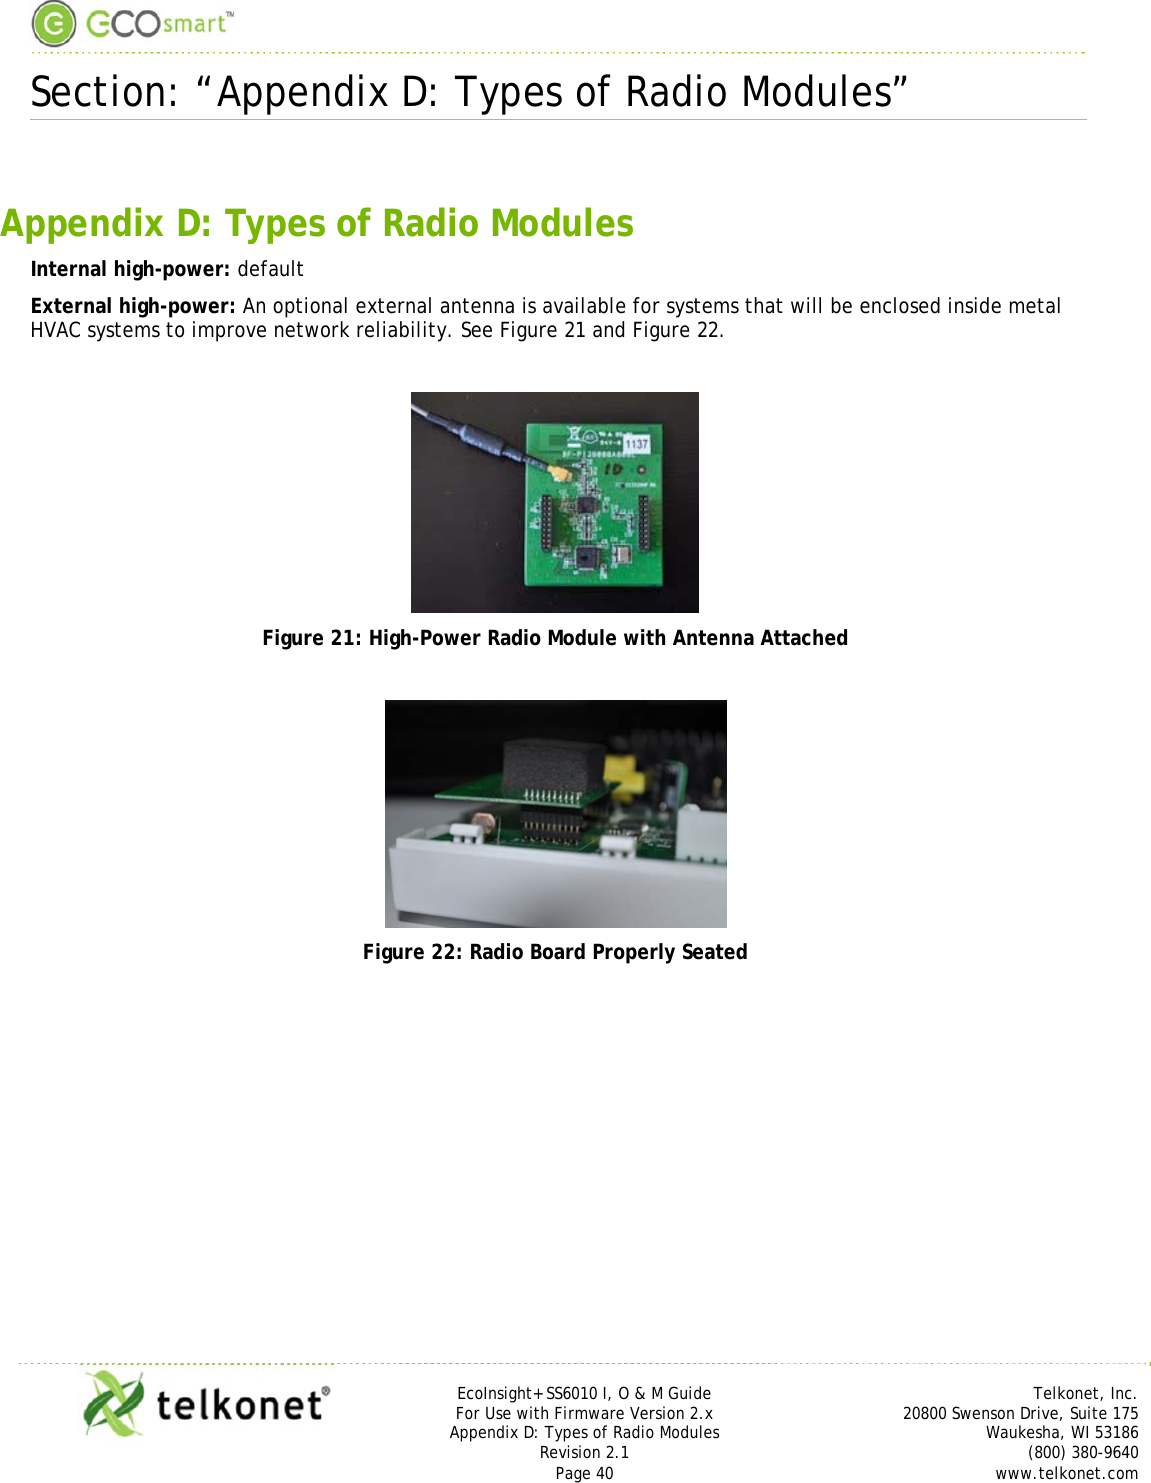  Section: “Appendix D: Types of Radio Modules”     EcoInsight+ SS6010 I, O &amp; M Guide Telkonet, Inc. For Use with Firmware Version 2.x 20800 Swenson Drive, Suite 175 Appendix D: Types of Radio Modules Waukesha, WI 53186 Revision 2.1  (800) 380-9640 Page 40  www.telkonet.com   Appendix D: Types of Radio Modules Internal high-power: default External high-power: An optional external antenna is available for systems that will be enclosed inside metal HVAC systems to improve network reliability. See Figure 21 and Figure 22.   Figure 21: High-Power Radio Module with Antenna Attached   Figure 22: Radio Board Properly Seated   